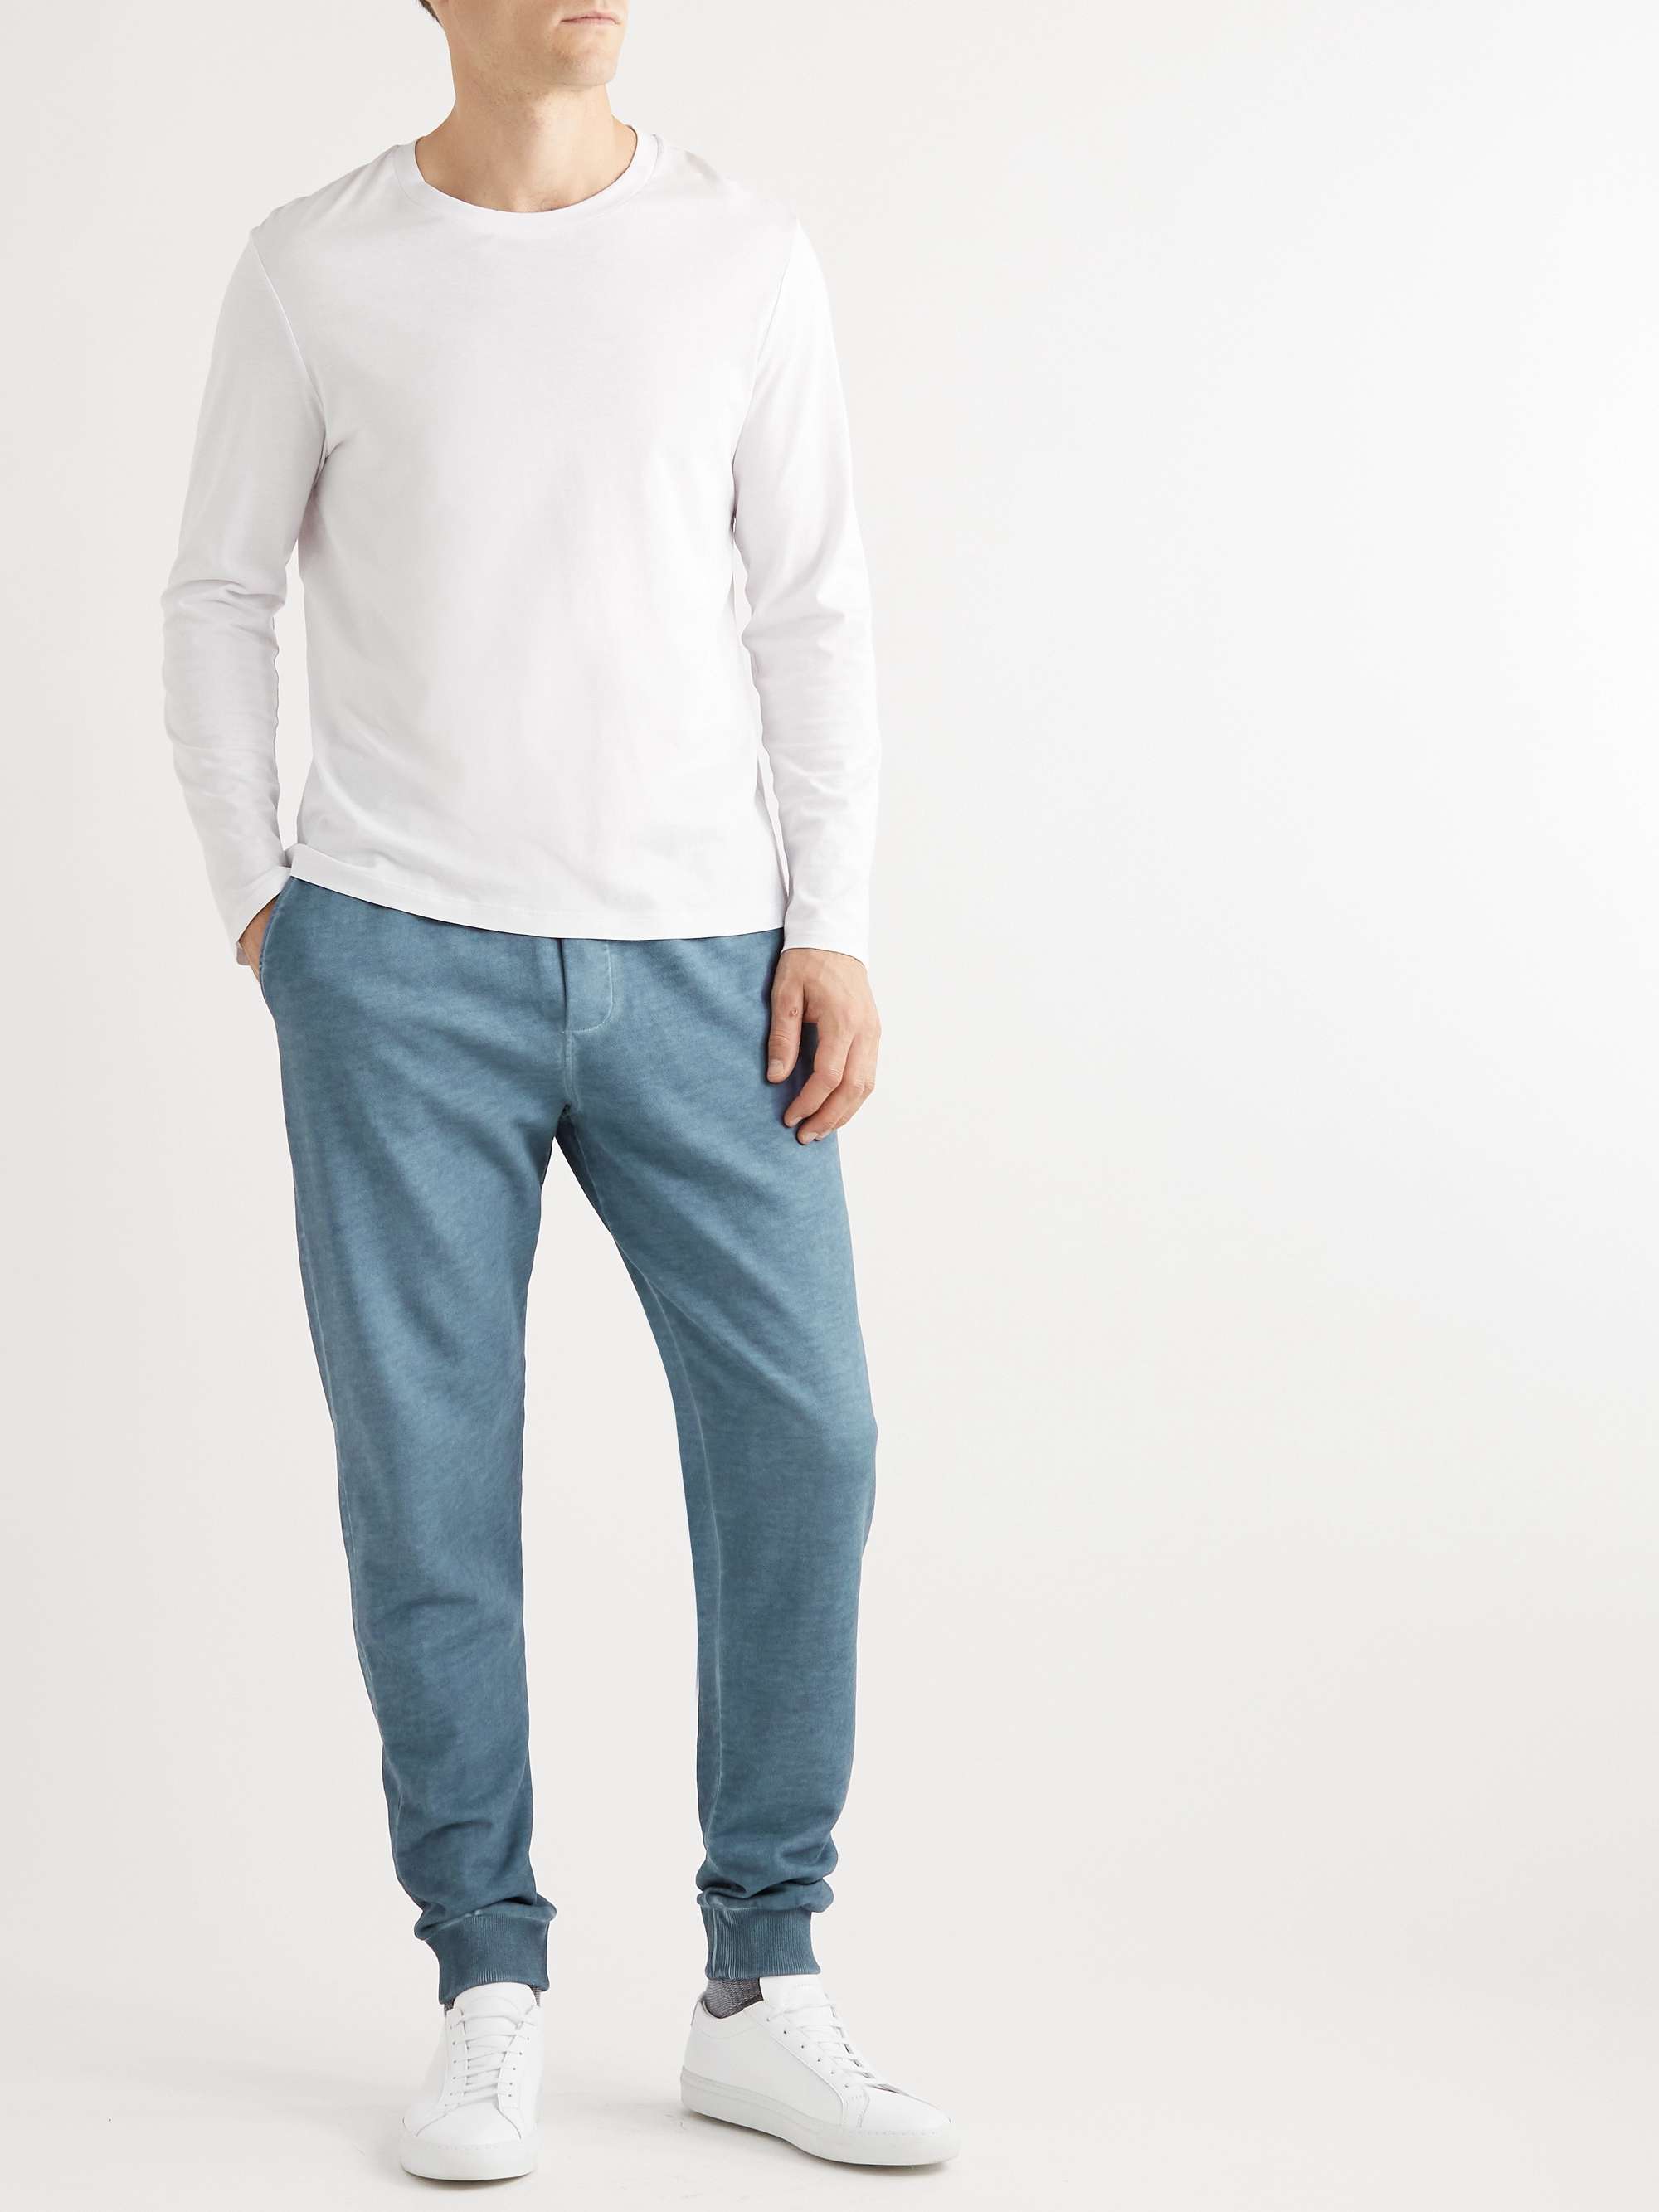 MR P. Slim-Fit Tapered Garment-Dyed Cotton-Jersey Sweatpants